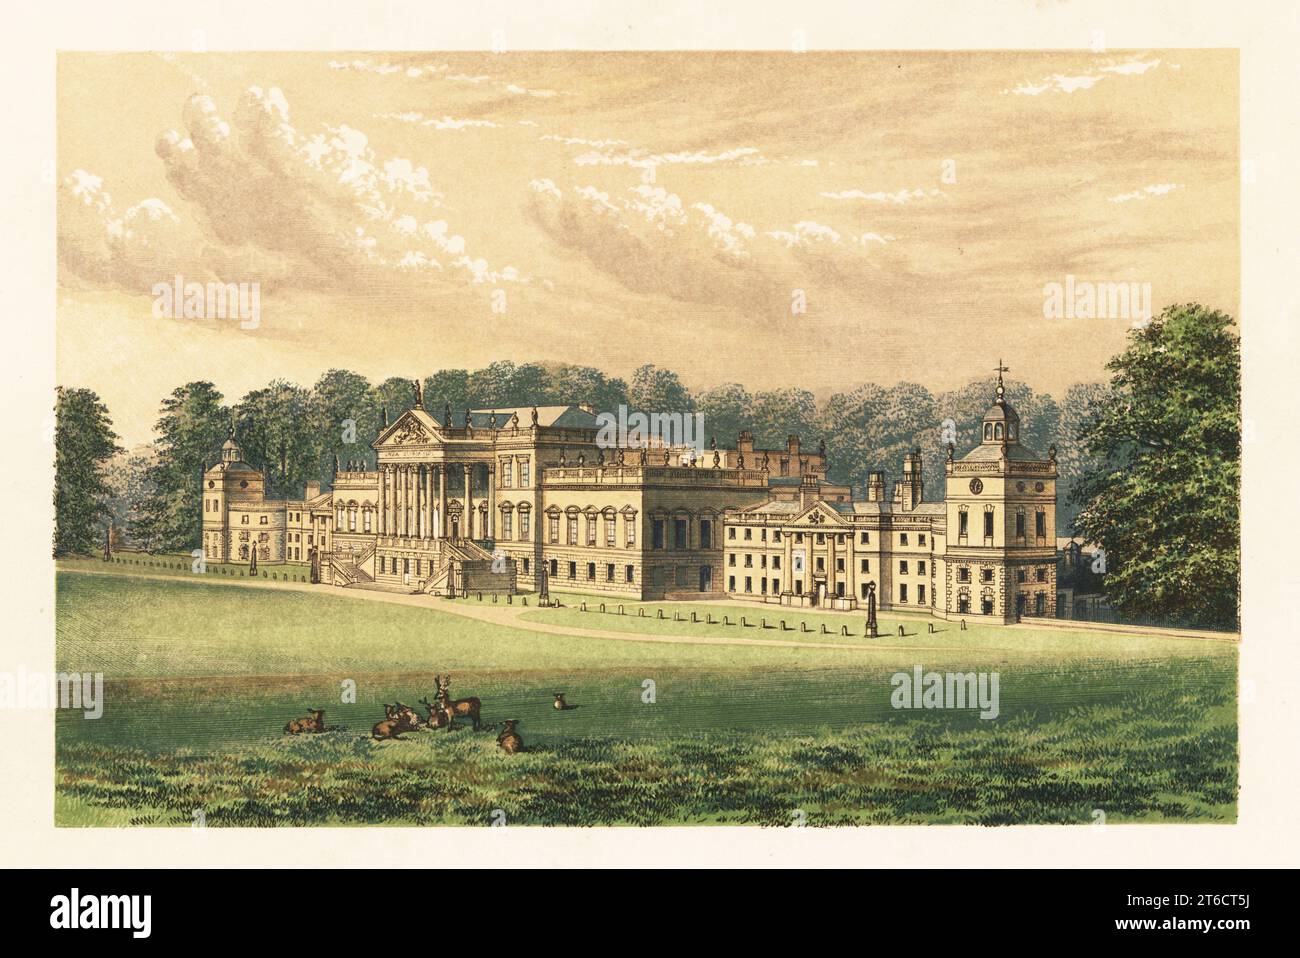 Wentworth Woodhouse, Yorkshire, England. East front of the Jacobean house rebuilt by Henry Flitcroft for Thomas Watson-Wentworth, Lord Malton, in the 18th century. The west front was rebuilt in English Baroque style by Ralph Tunnicliffe. The gardens were landscaped by Humphry Repton in 1790. Colour woodblock by Benjamin Fawcett in the Baxter process of an illustration by Alexander Francis Lydon from Reverend Francis Orpen Morriss Picturesque Views of the Seats of Noblemen and Gentlemen of Great Britain and Ireland, William Mackenzie, London, 1880. Stock Photo